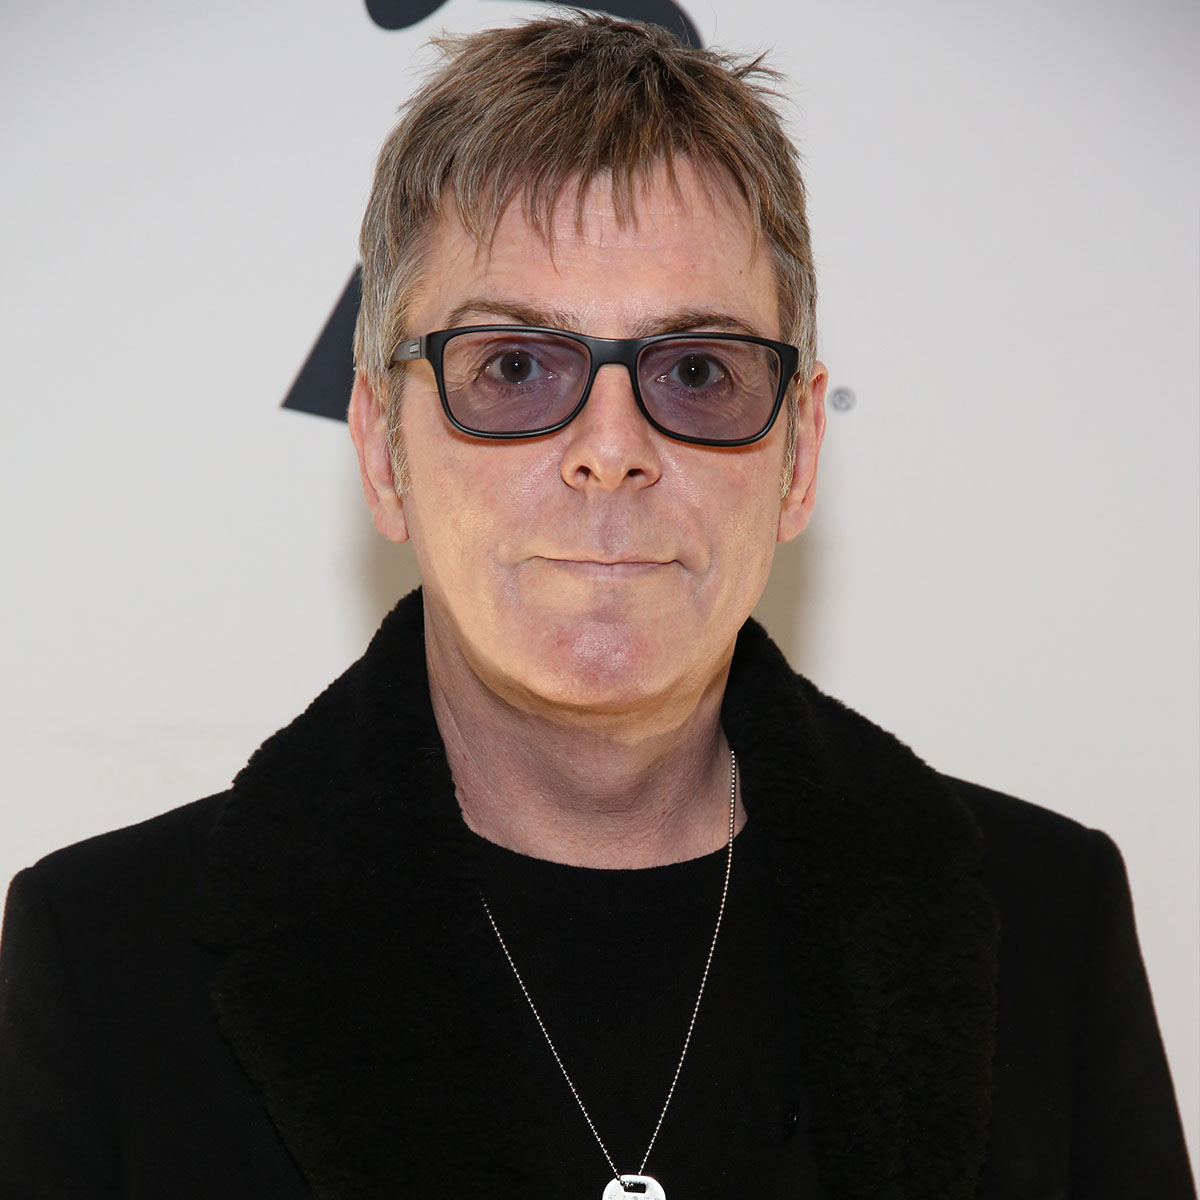 The Smiths Bassist Andy Rourke Dead at 59 After Cancer Battle